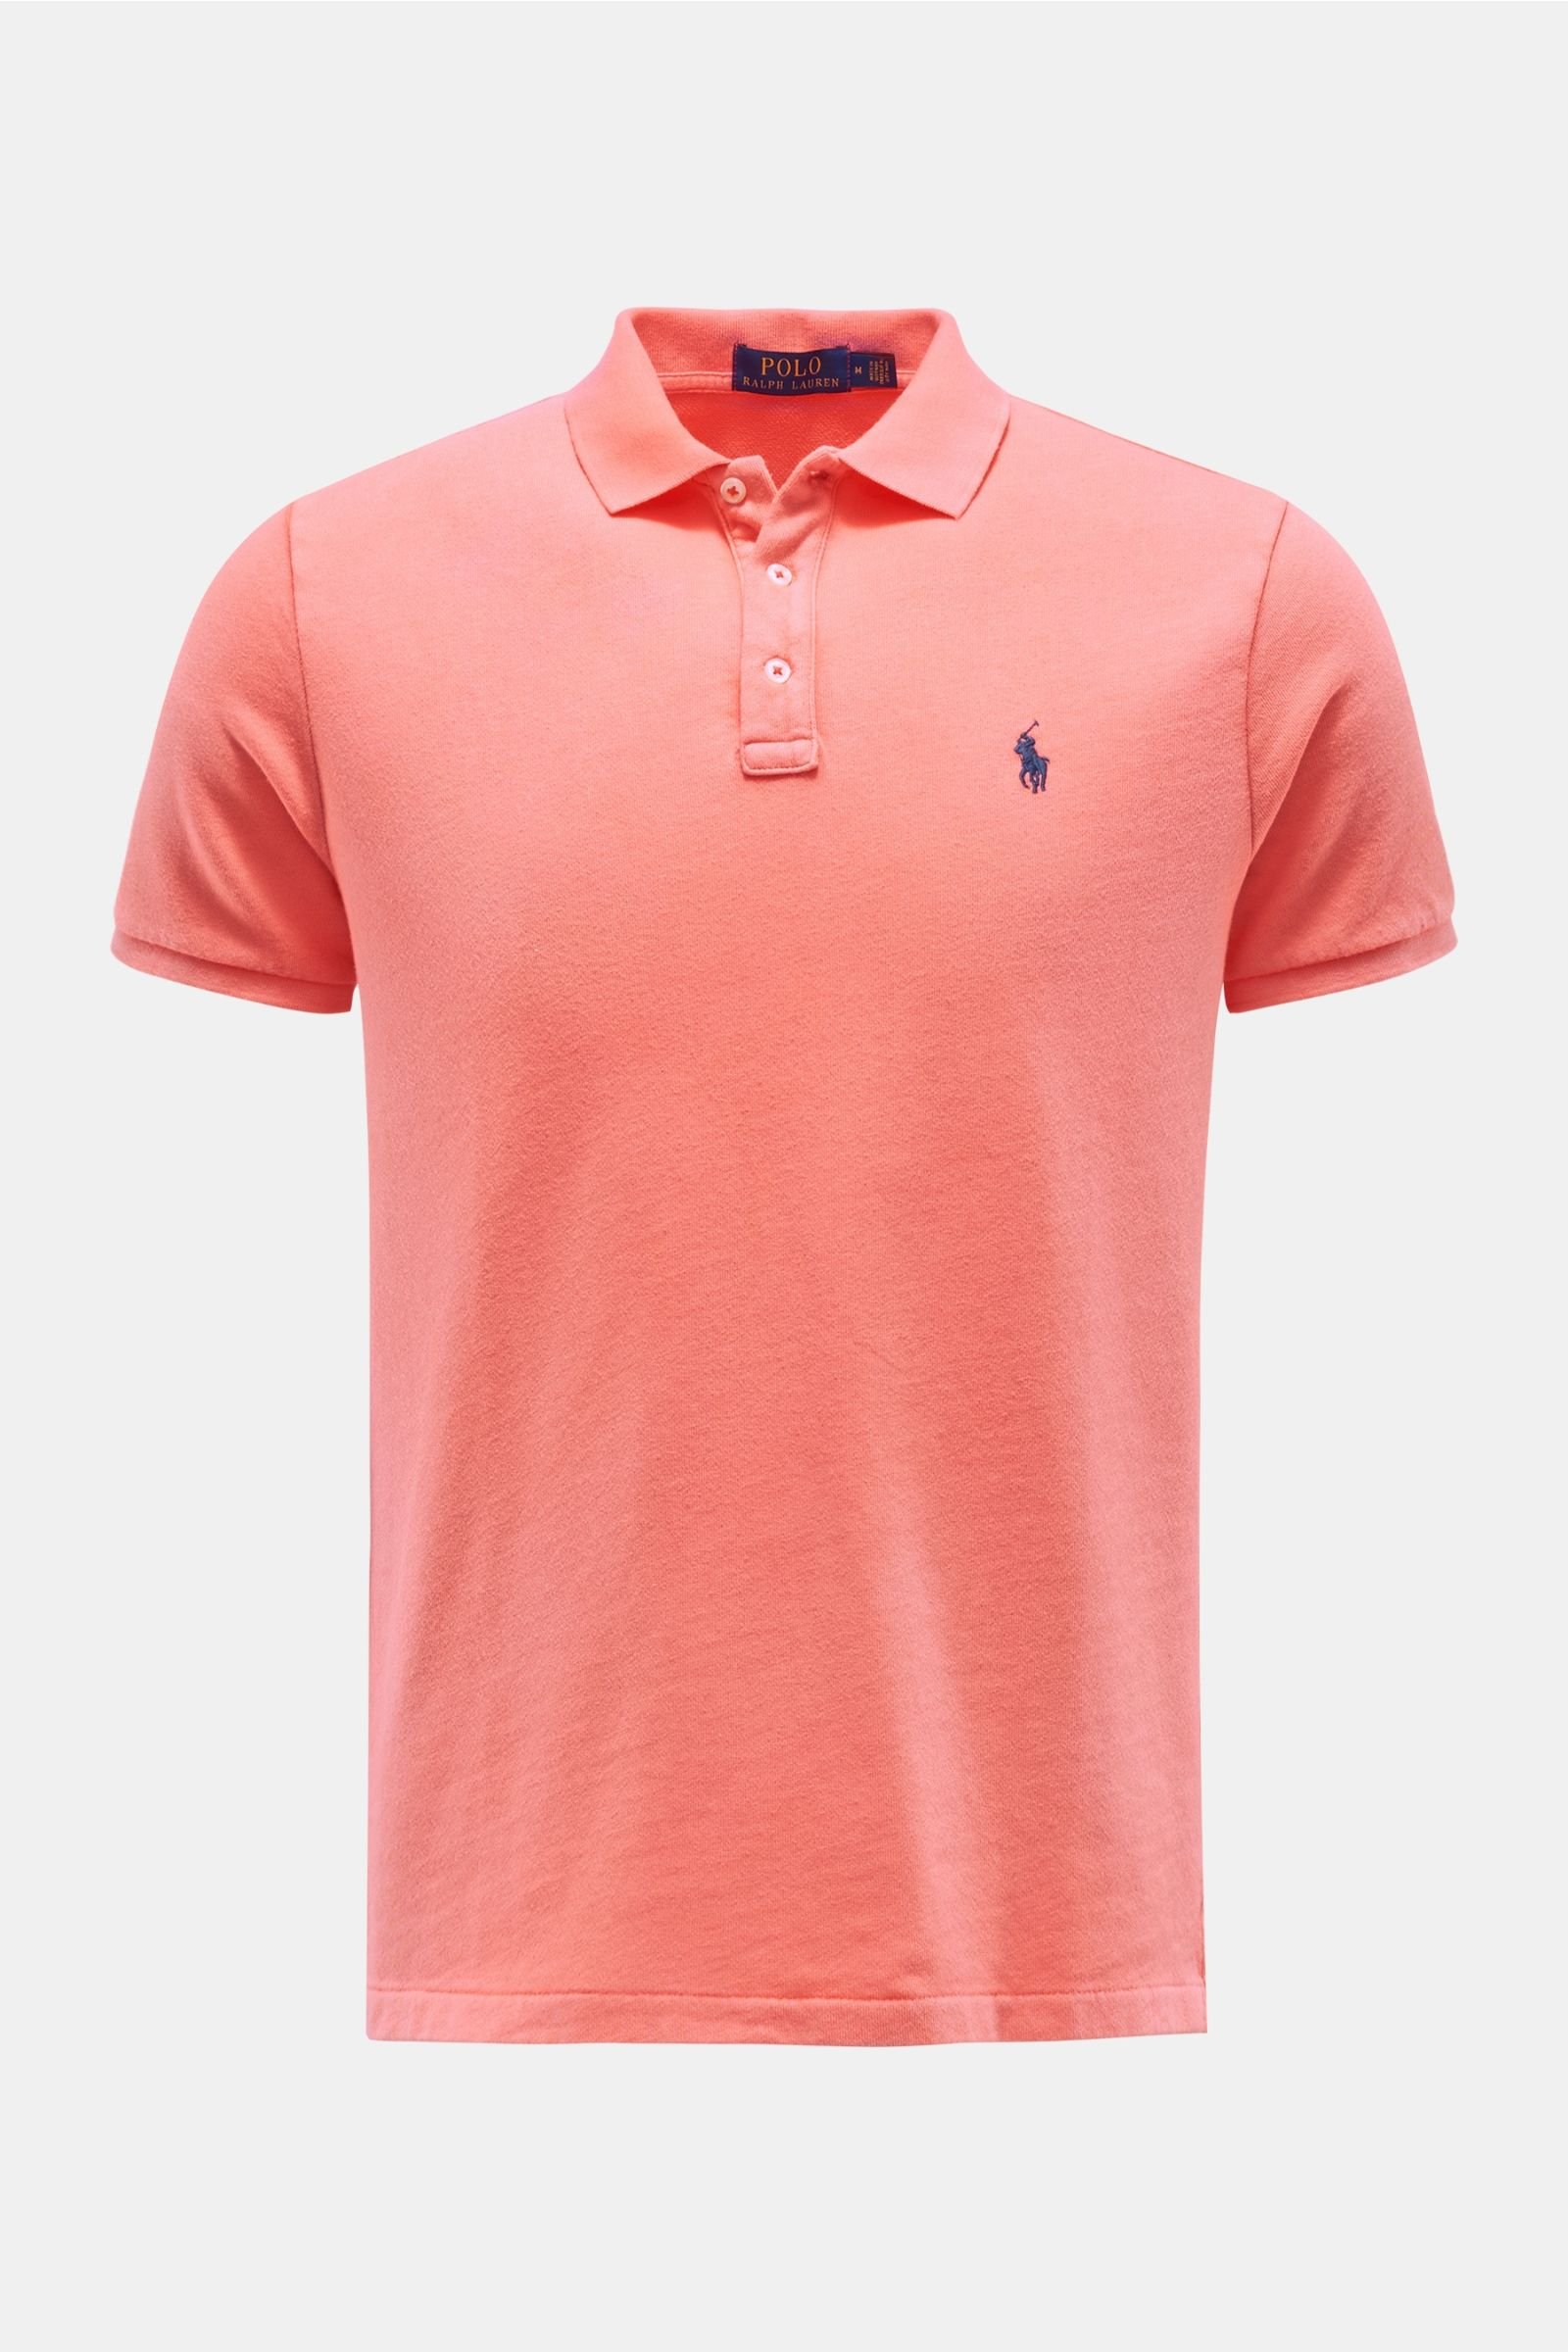 Jersey polo shirt coral